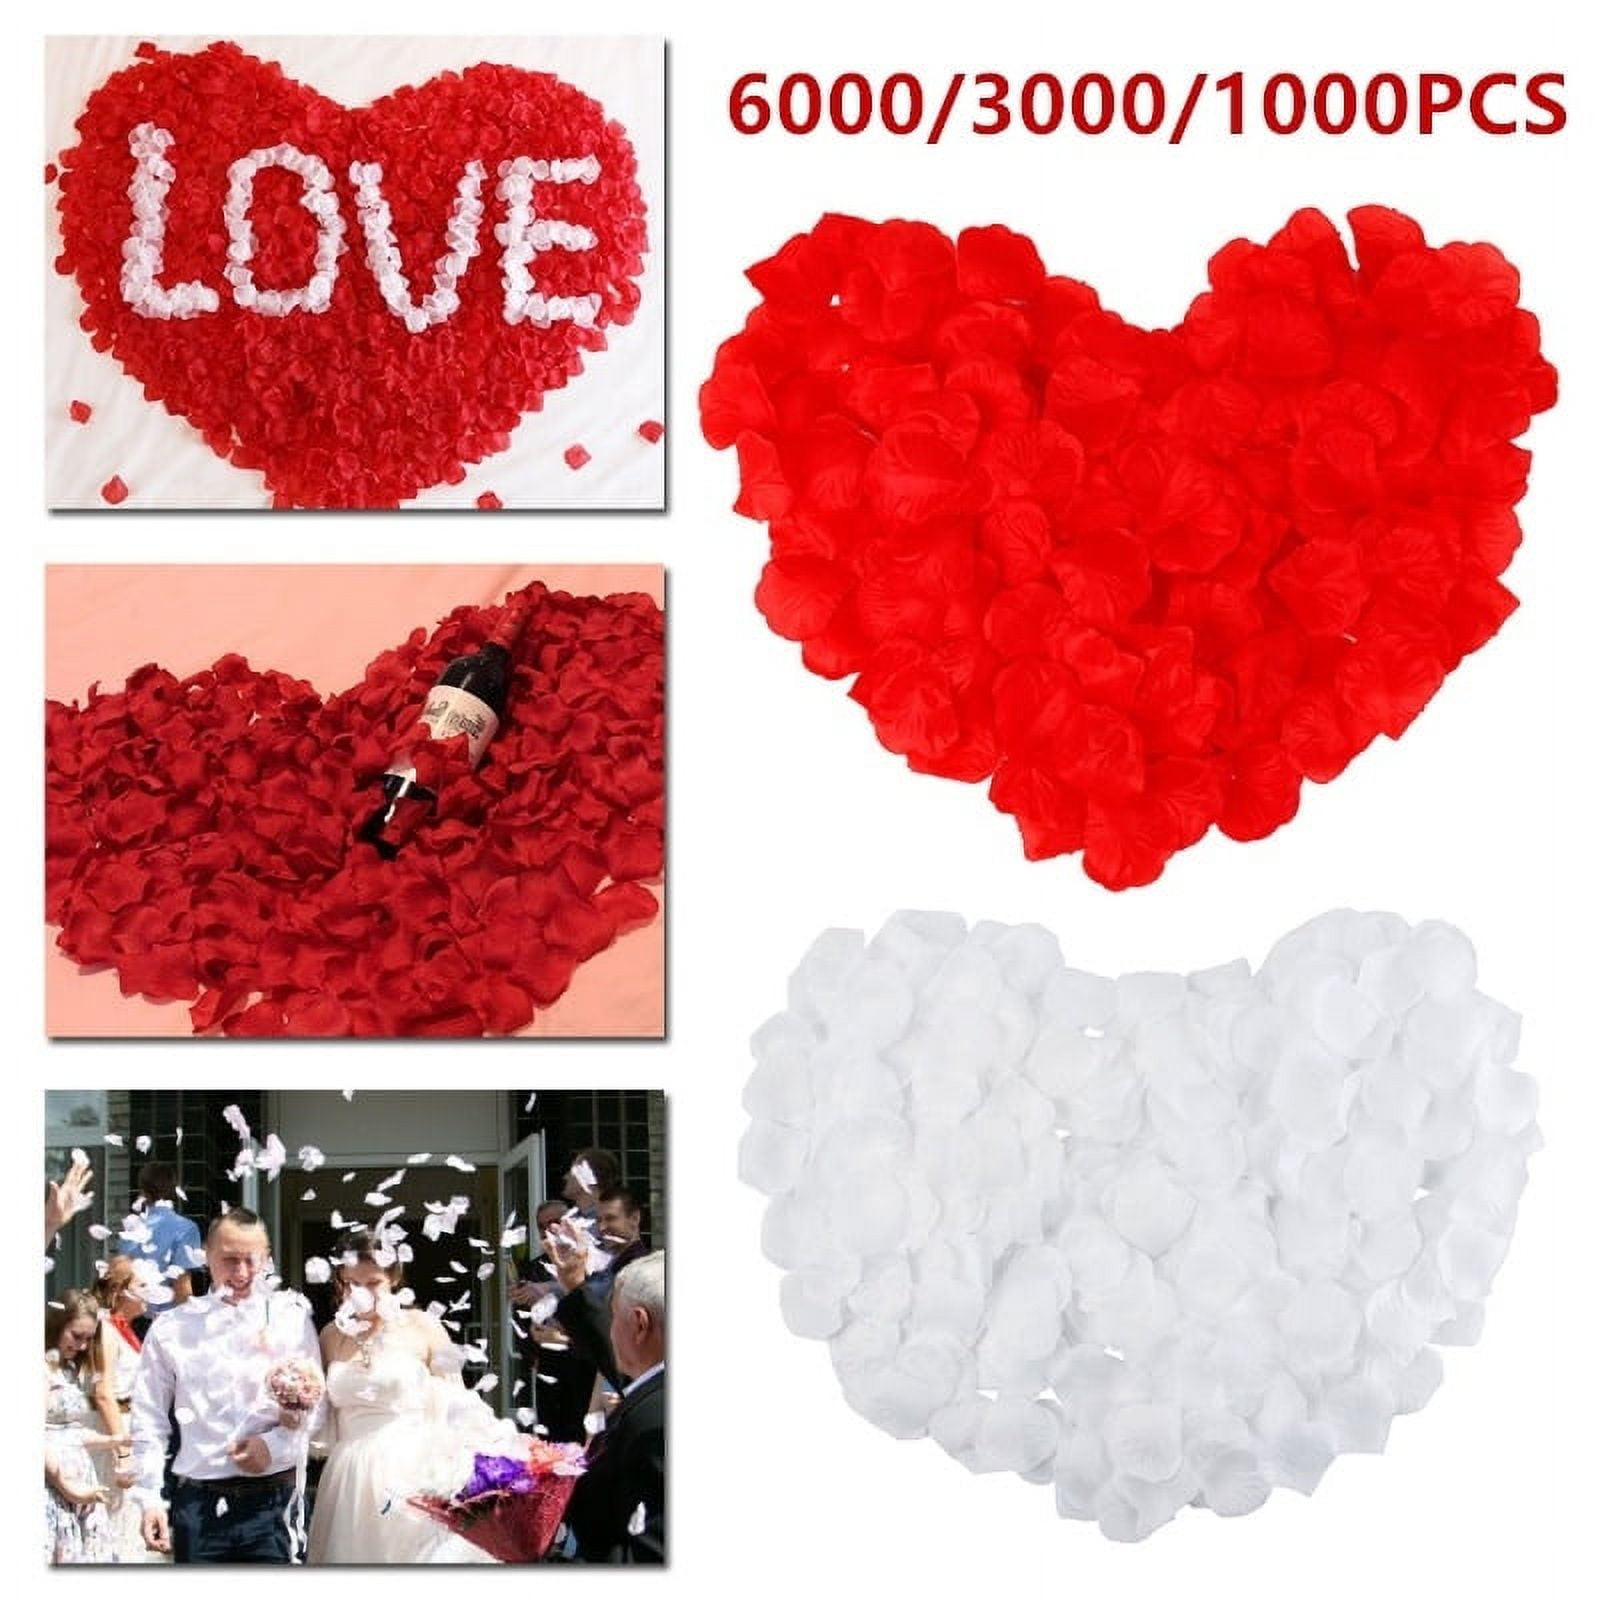 Zyoung 3000 Pieces Black Rose Petals Fake Artificial Flower Petals for Valentine Day,Wedding,Party Decoration,Romantic Night